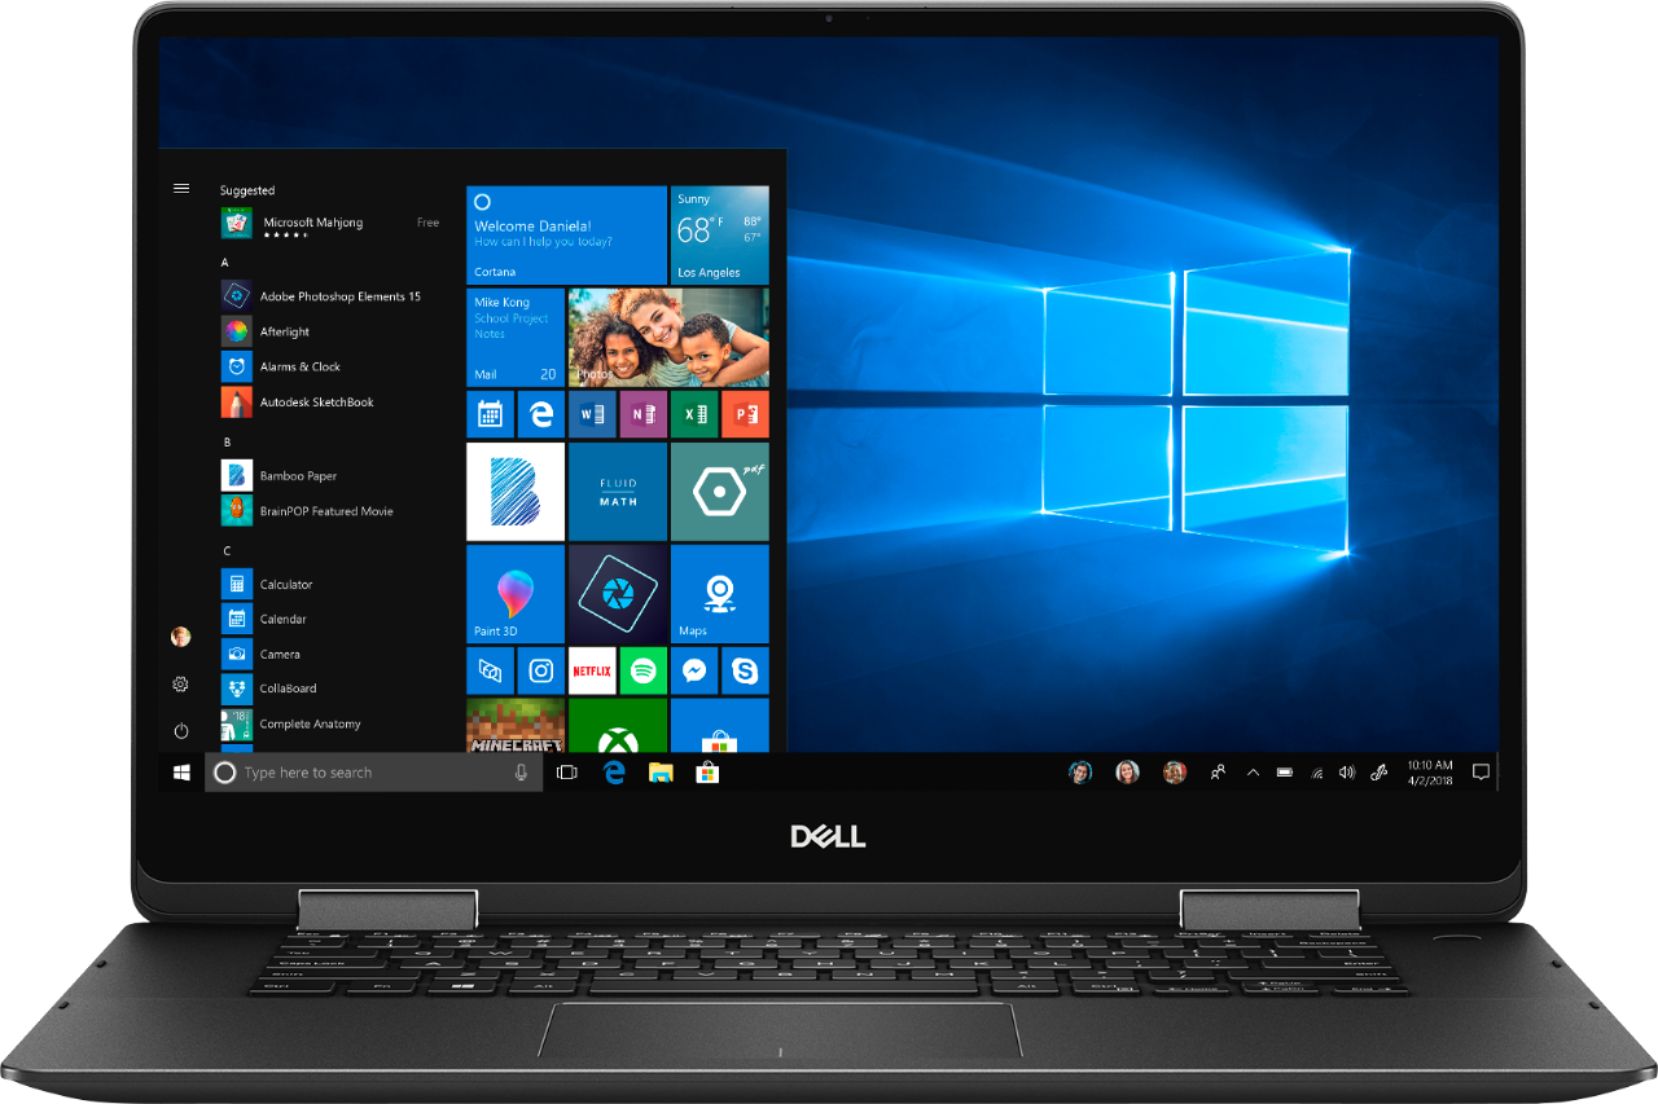 Dell - Inspiron 2-in-1 15.6" 4K Ultra HD Touch-Screen Laptop - Intel Core i7 - 16GB Memory - 512GB Solid State Drive - Black